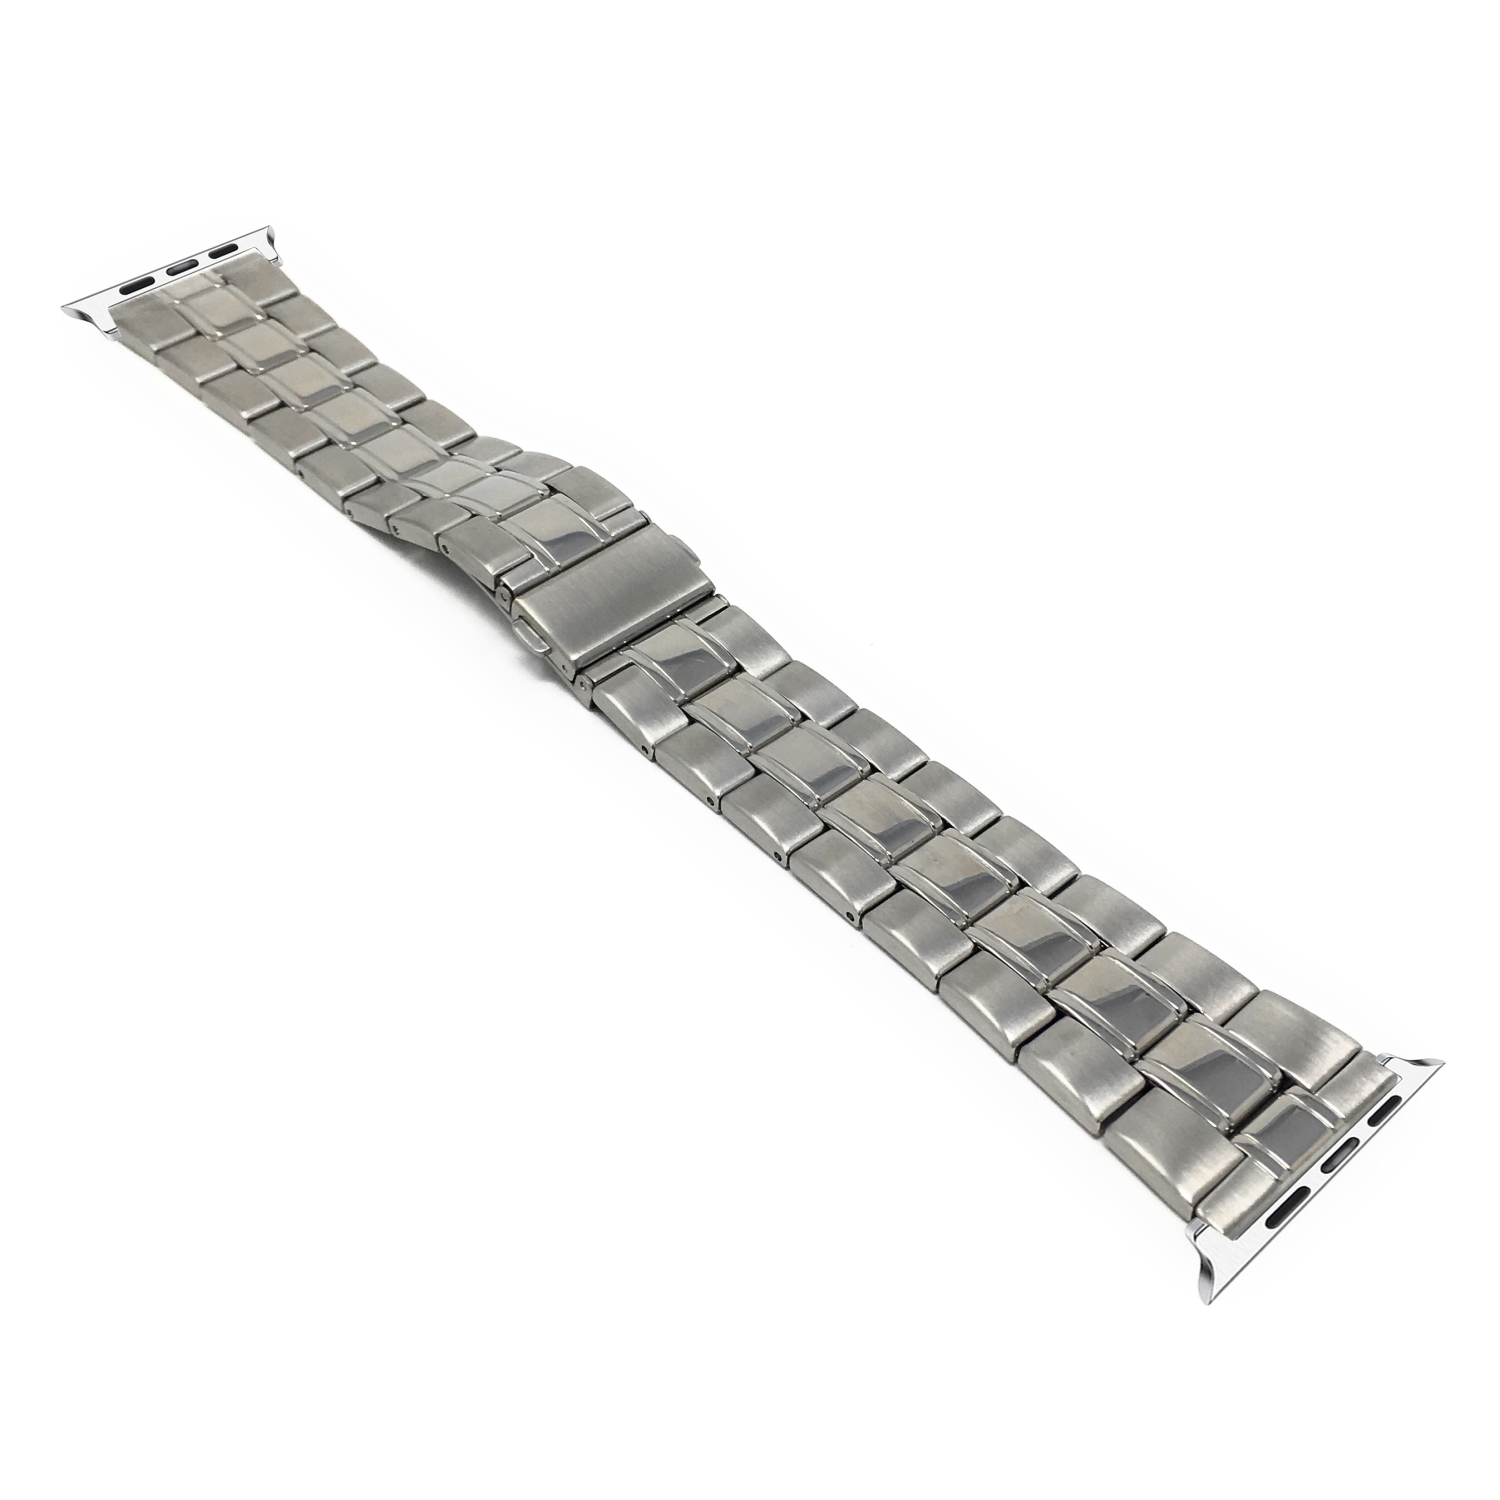 Bandini Stainless Steel Metal Replacement Watch Strap for Apple Watch Band 42mm / 44mm, Series 6 5 4 3 2 1 - Silver / Silver